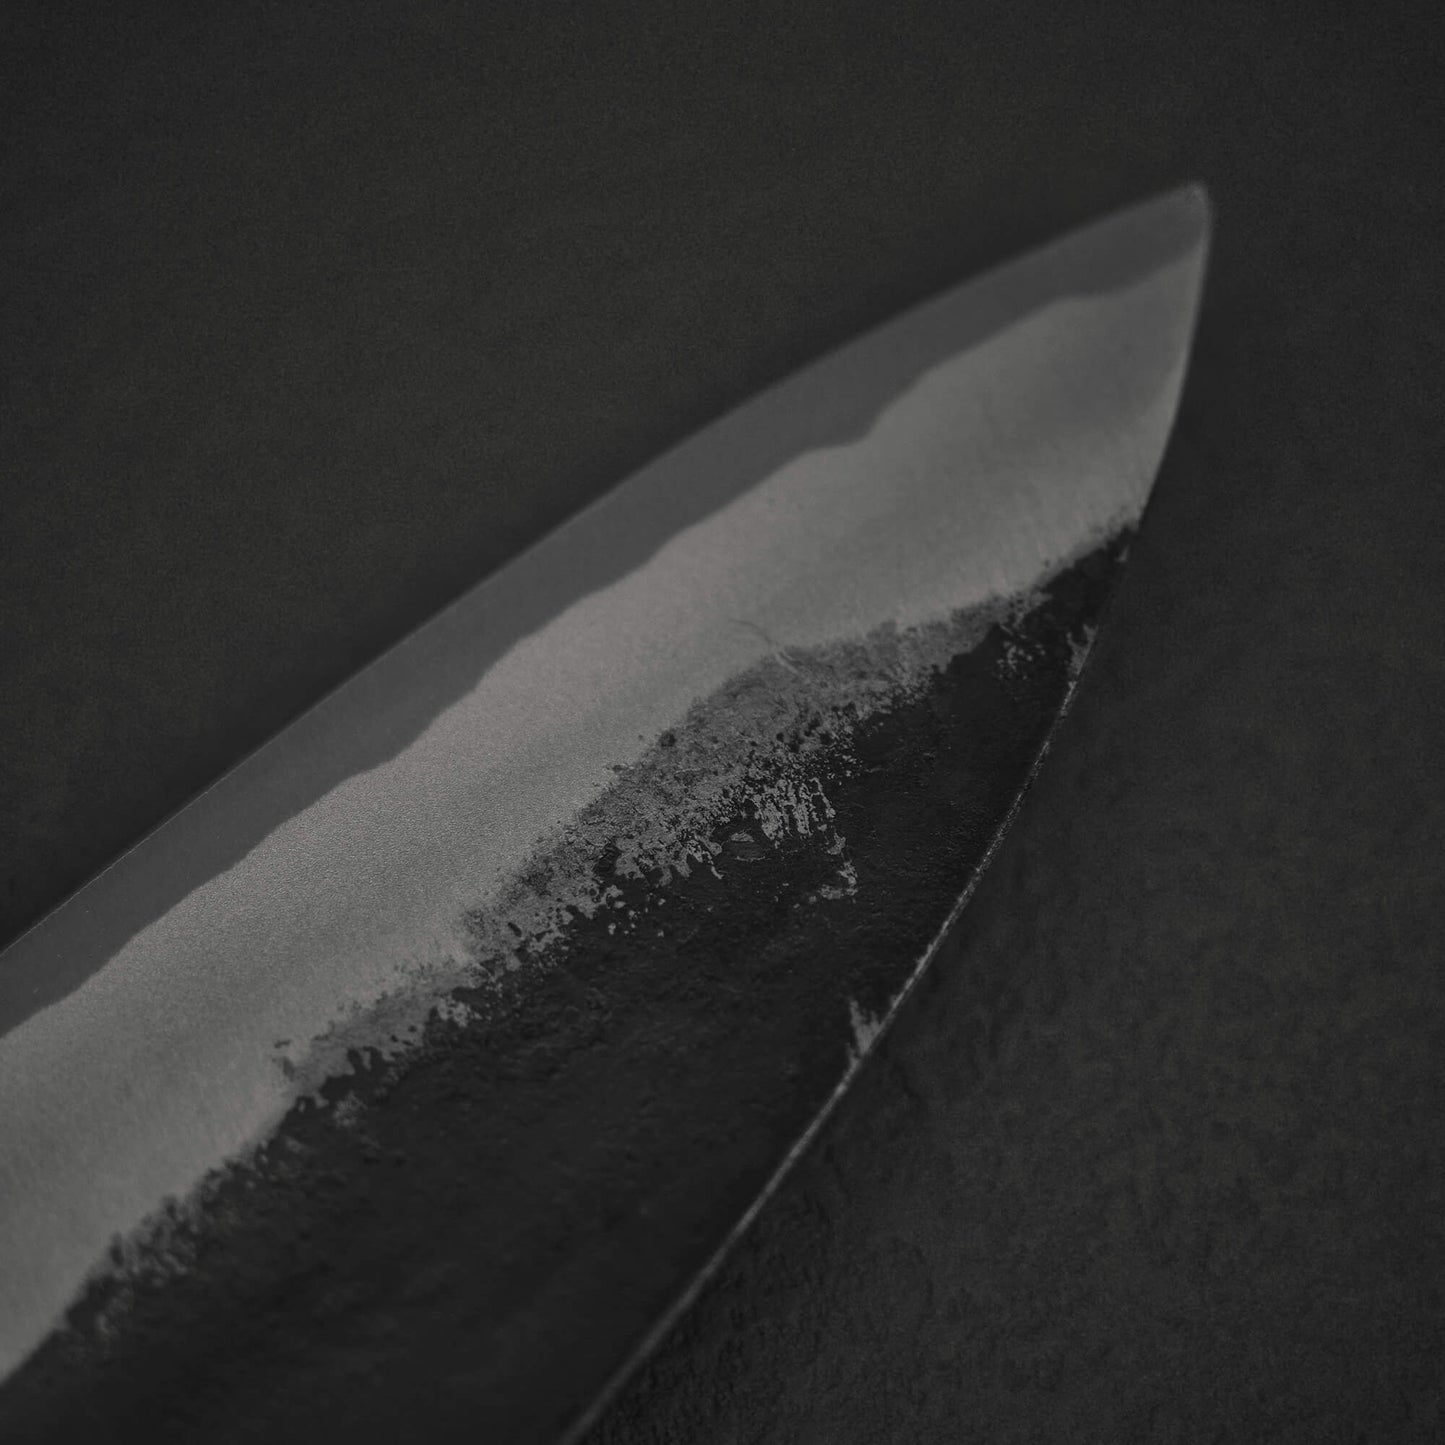 Close up view of Murata Buho kurouchi aogami#1 funayuki knife. Image focuses on the tip area of the left side of the blade.